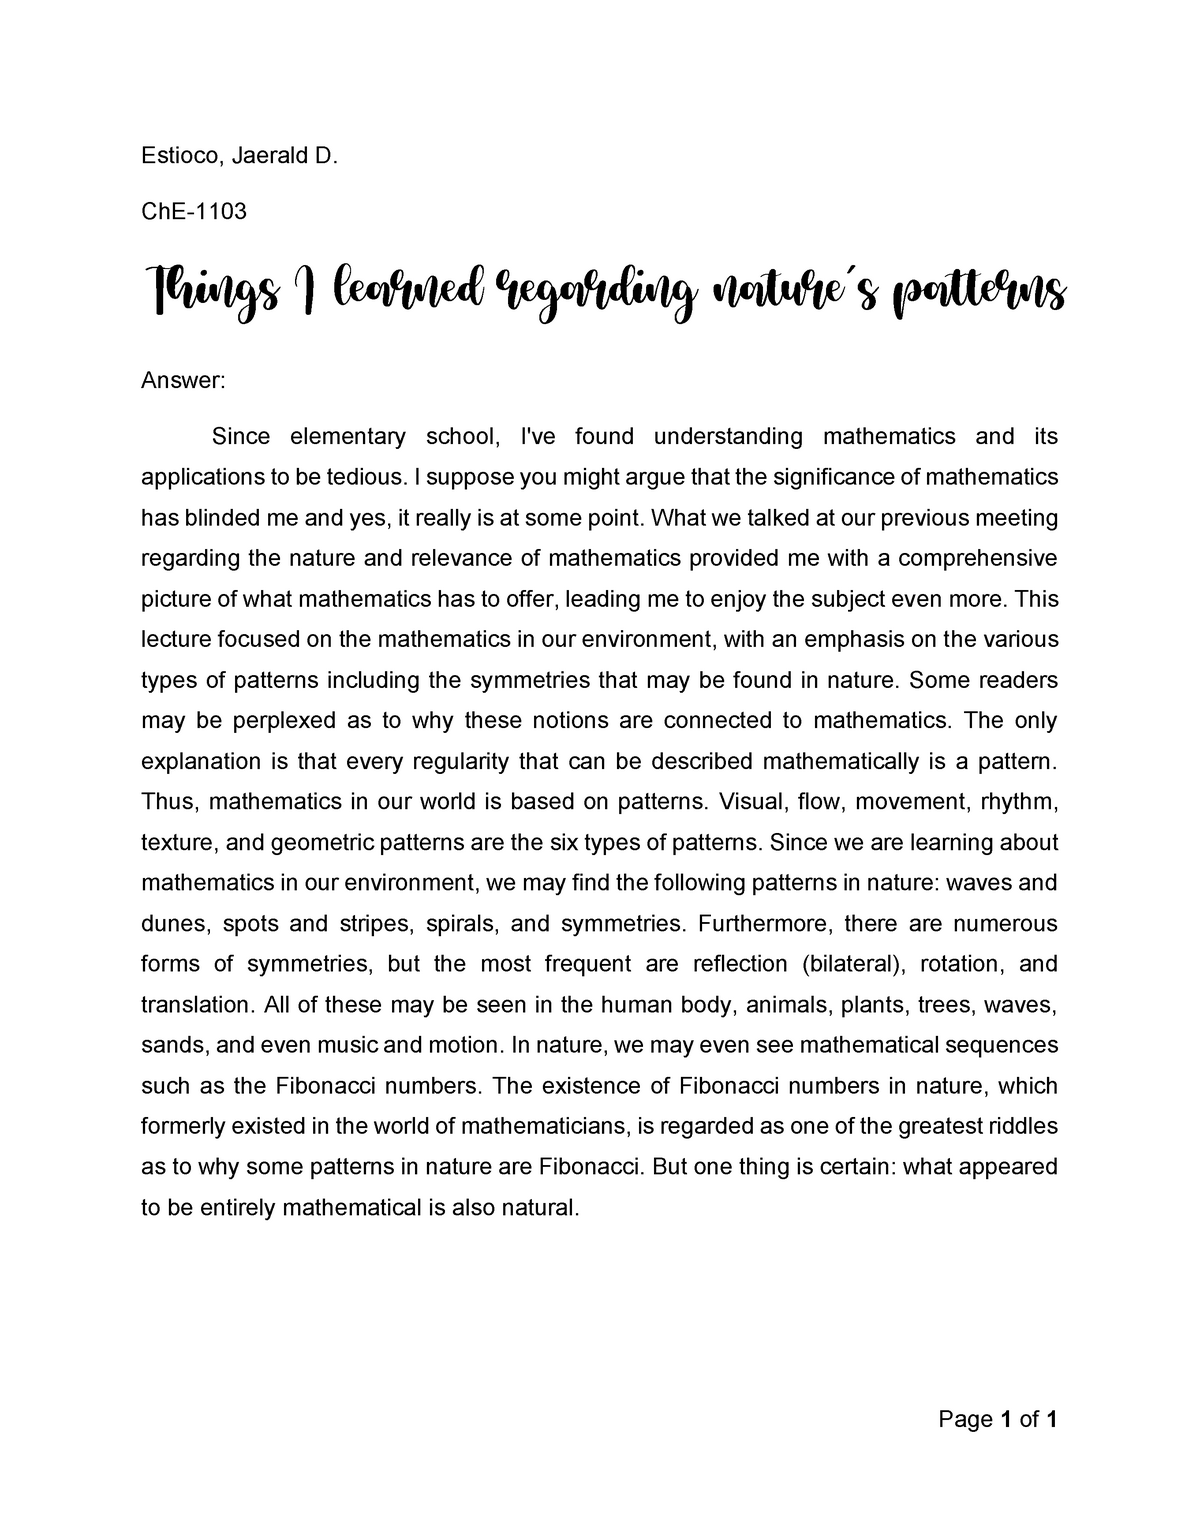 essay about patterns in nature